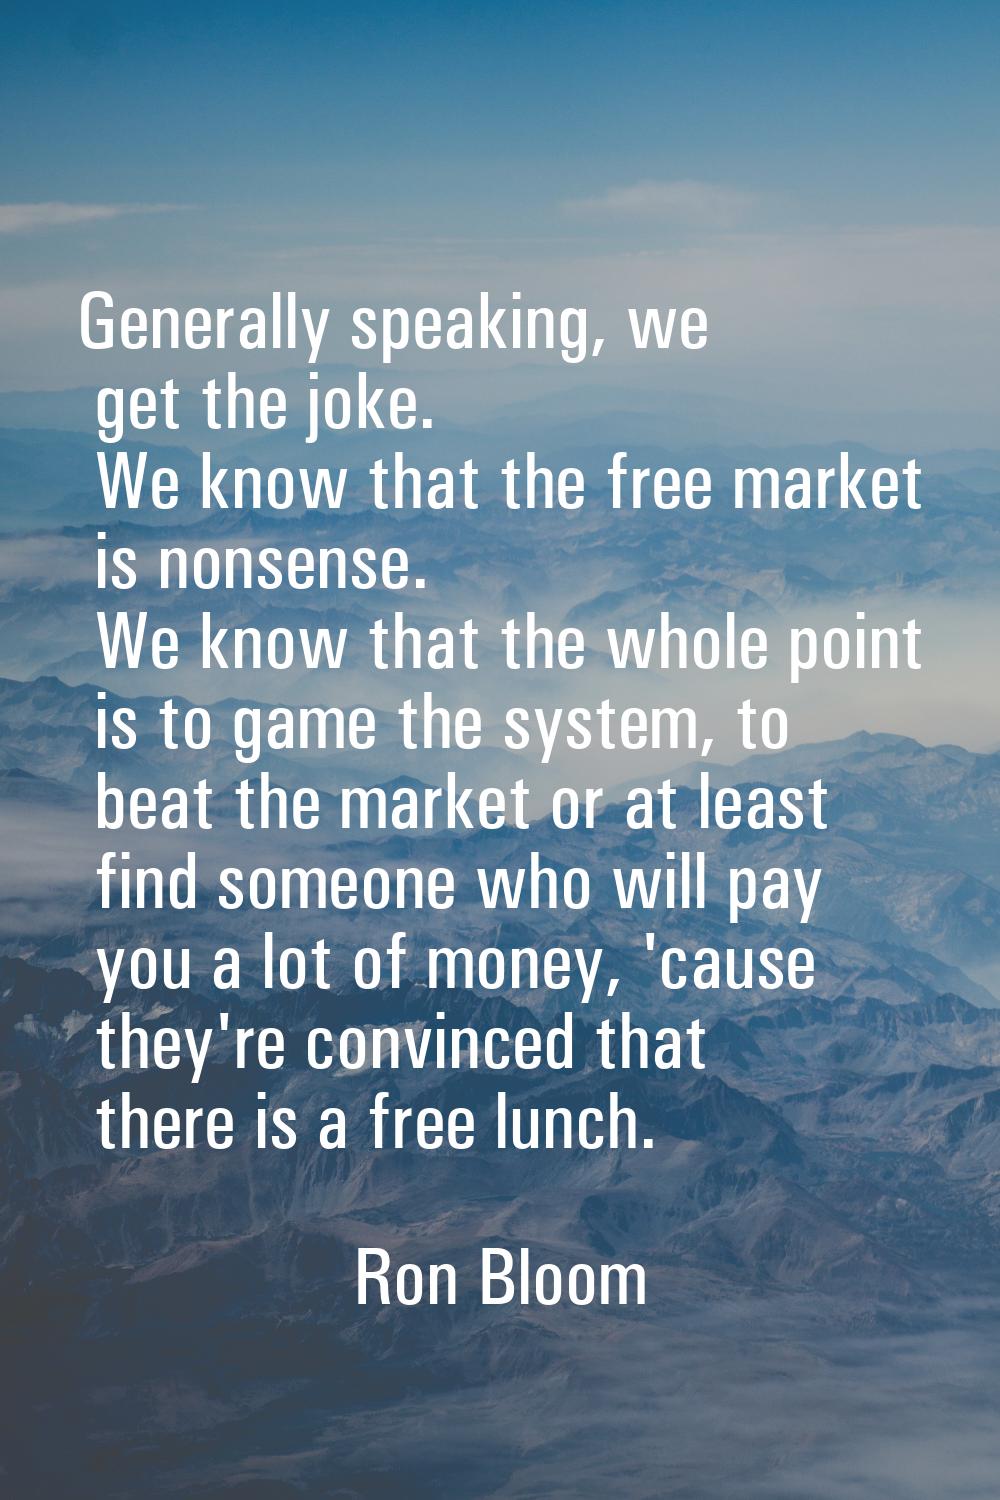 Generally speaking, we get the joke. We know that the free market is nonsense. We know that the who